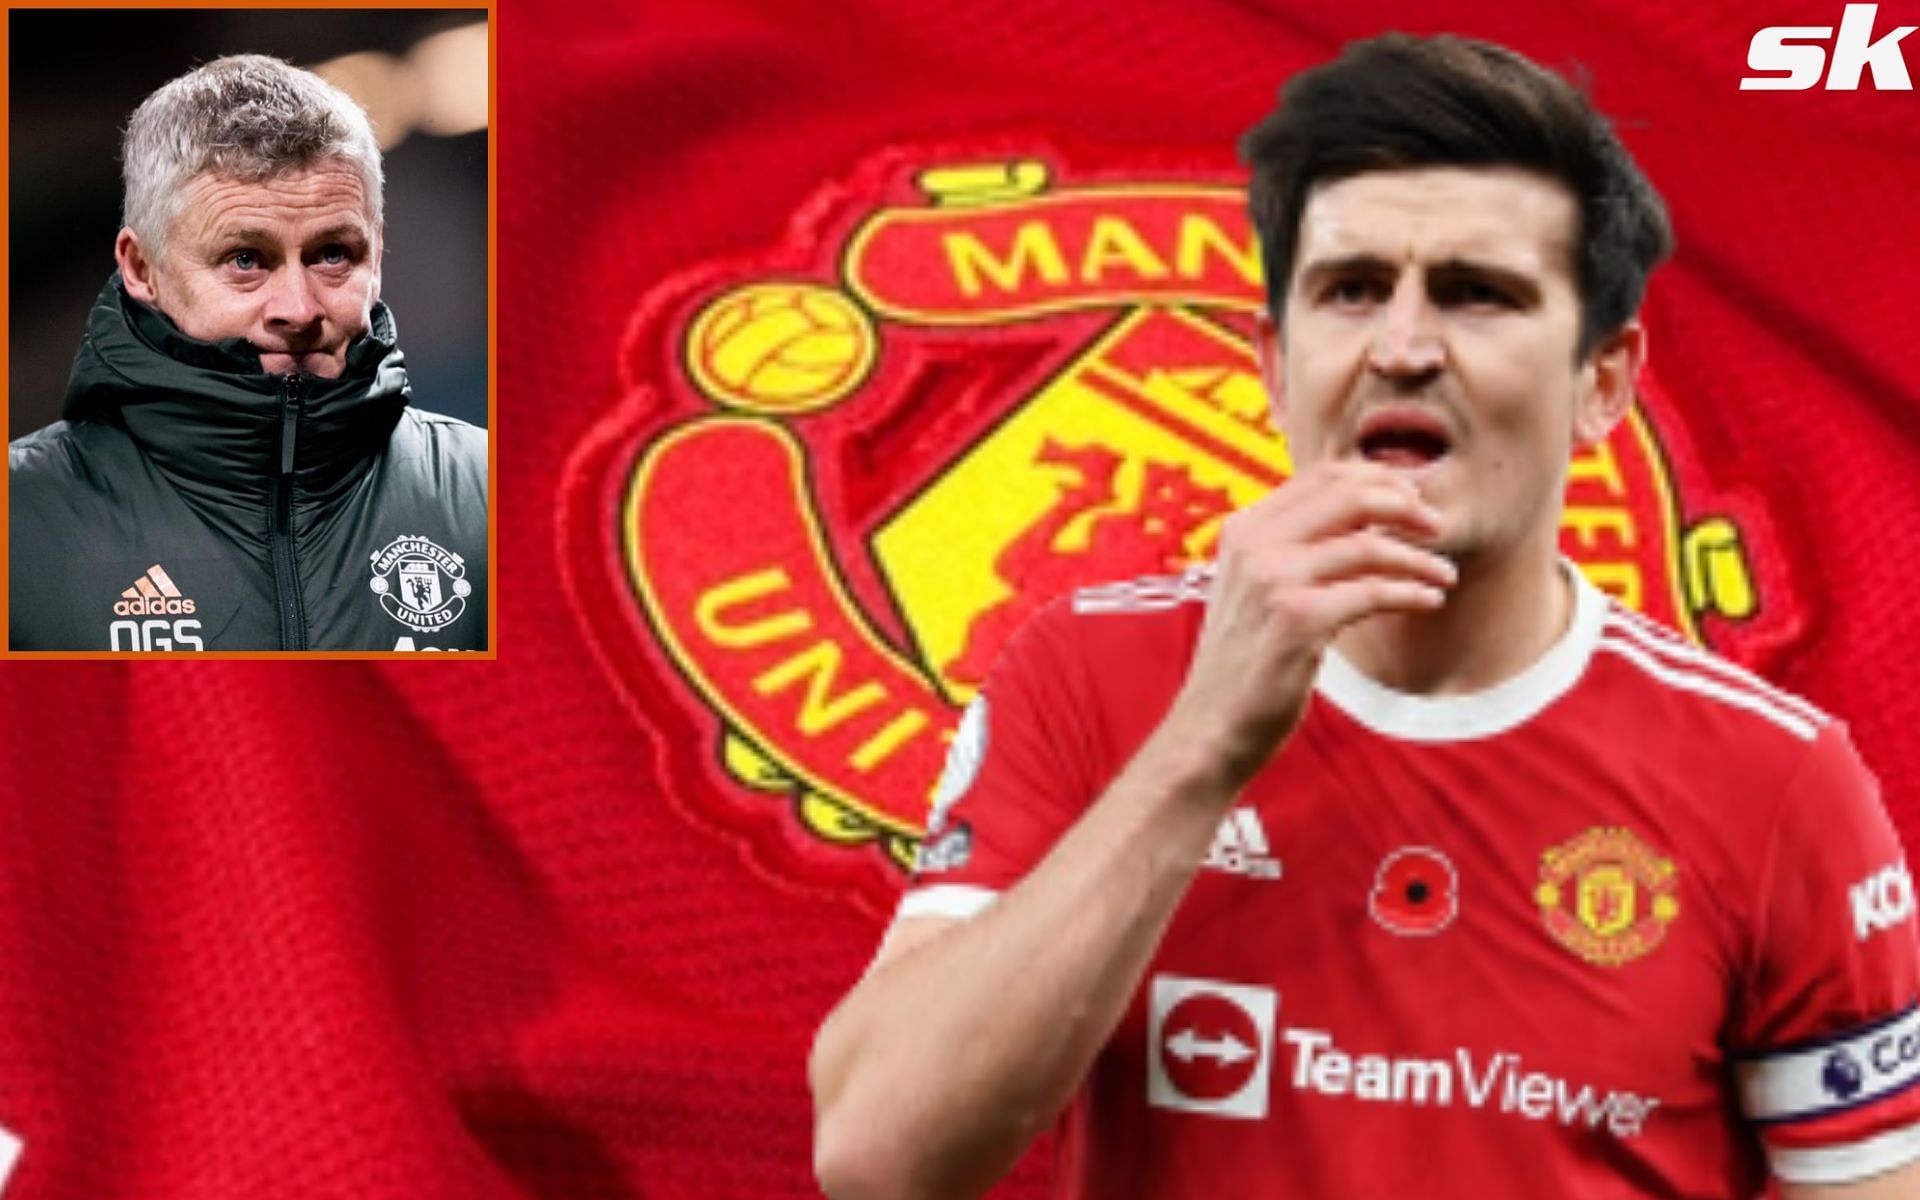 Manchester United want to replace &lt;a href=&#039;https://www.sportskeeda.com/player/harry-maguire&#039; target=&#039;_blank&#039; rel=&#039;noopener noreferrer&#039;&gt;Harry Maguire&lt;/a&gt; with Jules Kounde (Image via Sportskeeda)